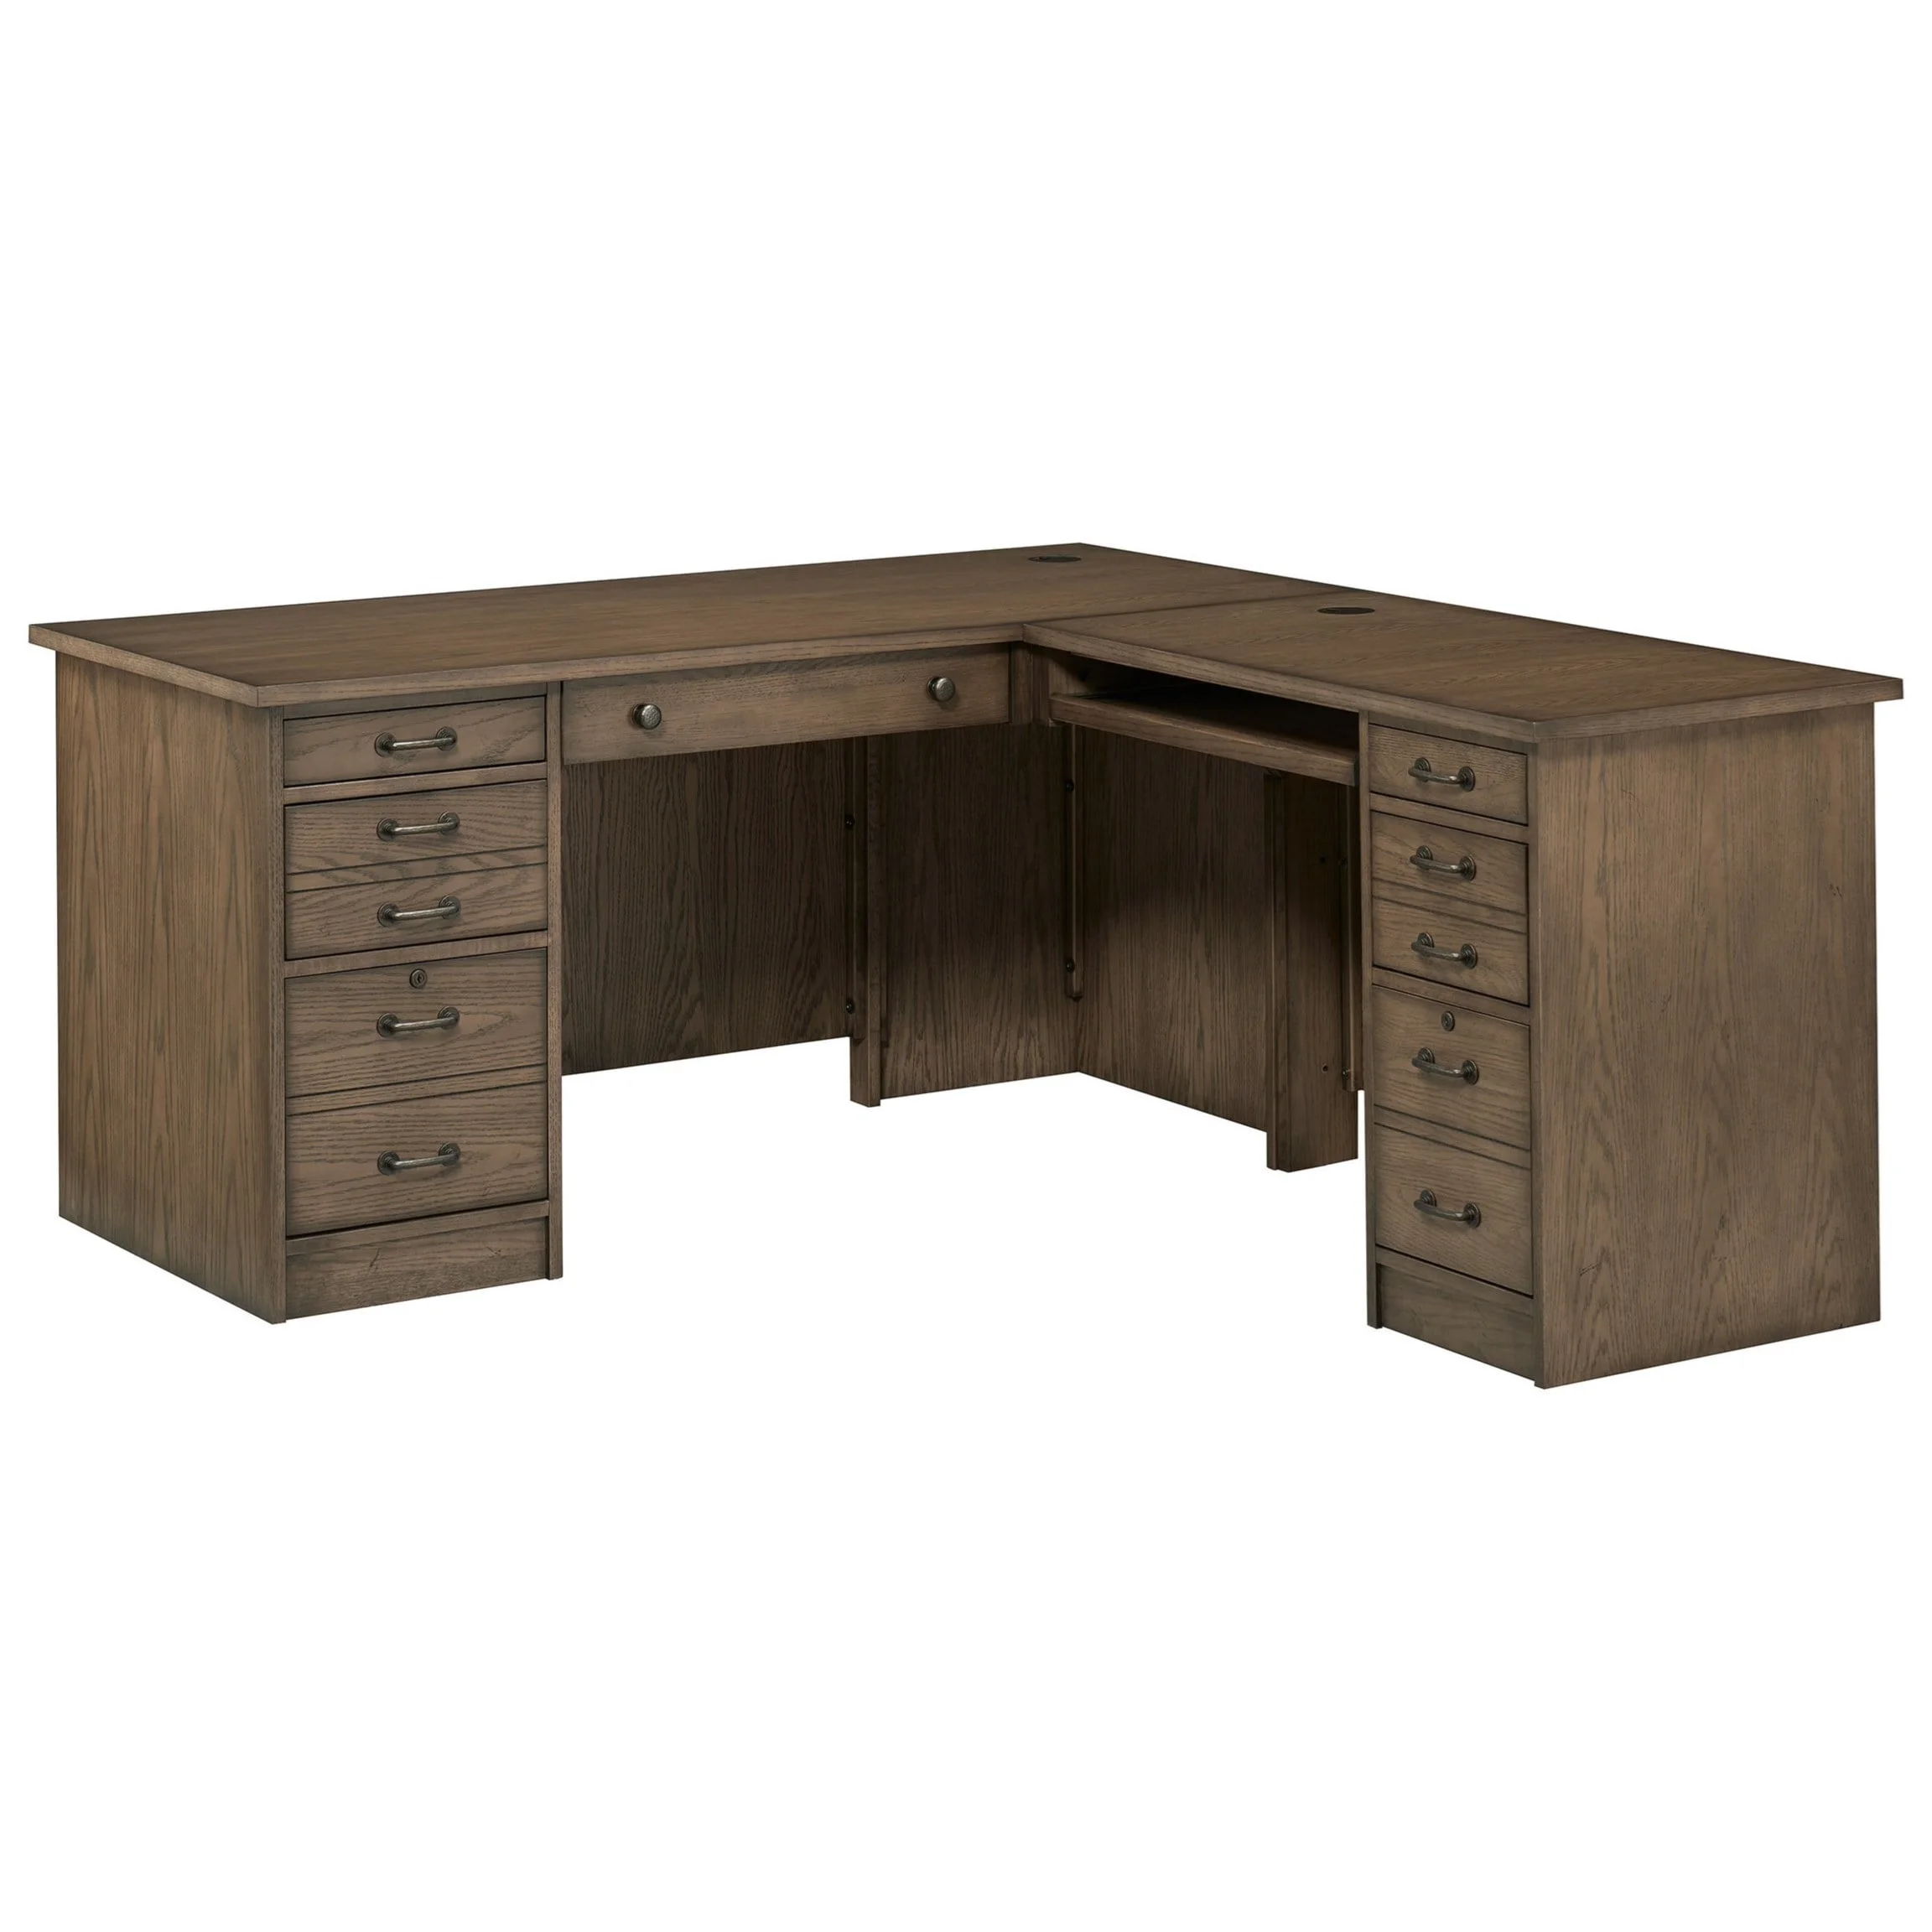 Winners Only Eastwood GE154R Transitional 54 Roll Top Desk with